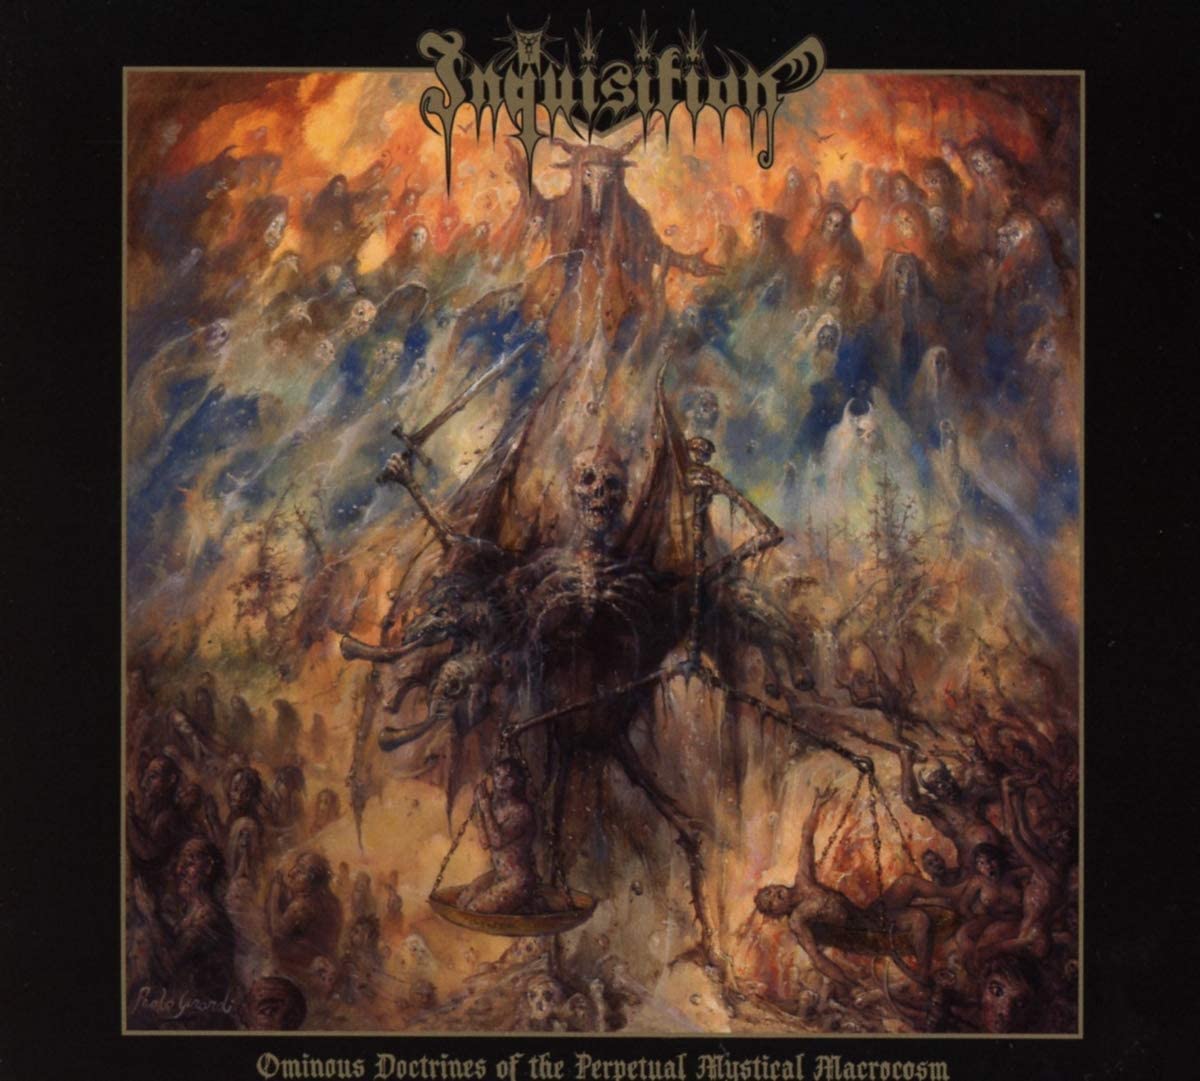 INQUISITION / Ominous Doctrines of the Perpetual Mystical Macrocosm  (2015 reissue)